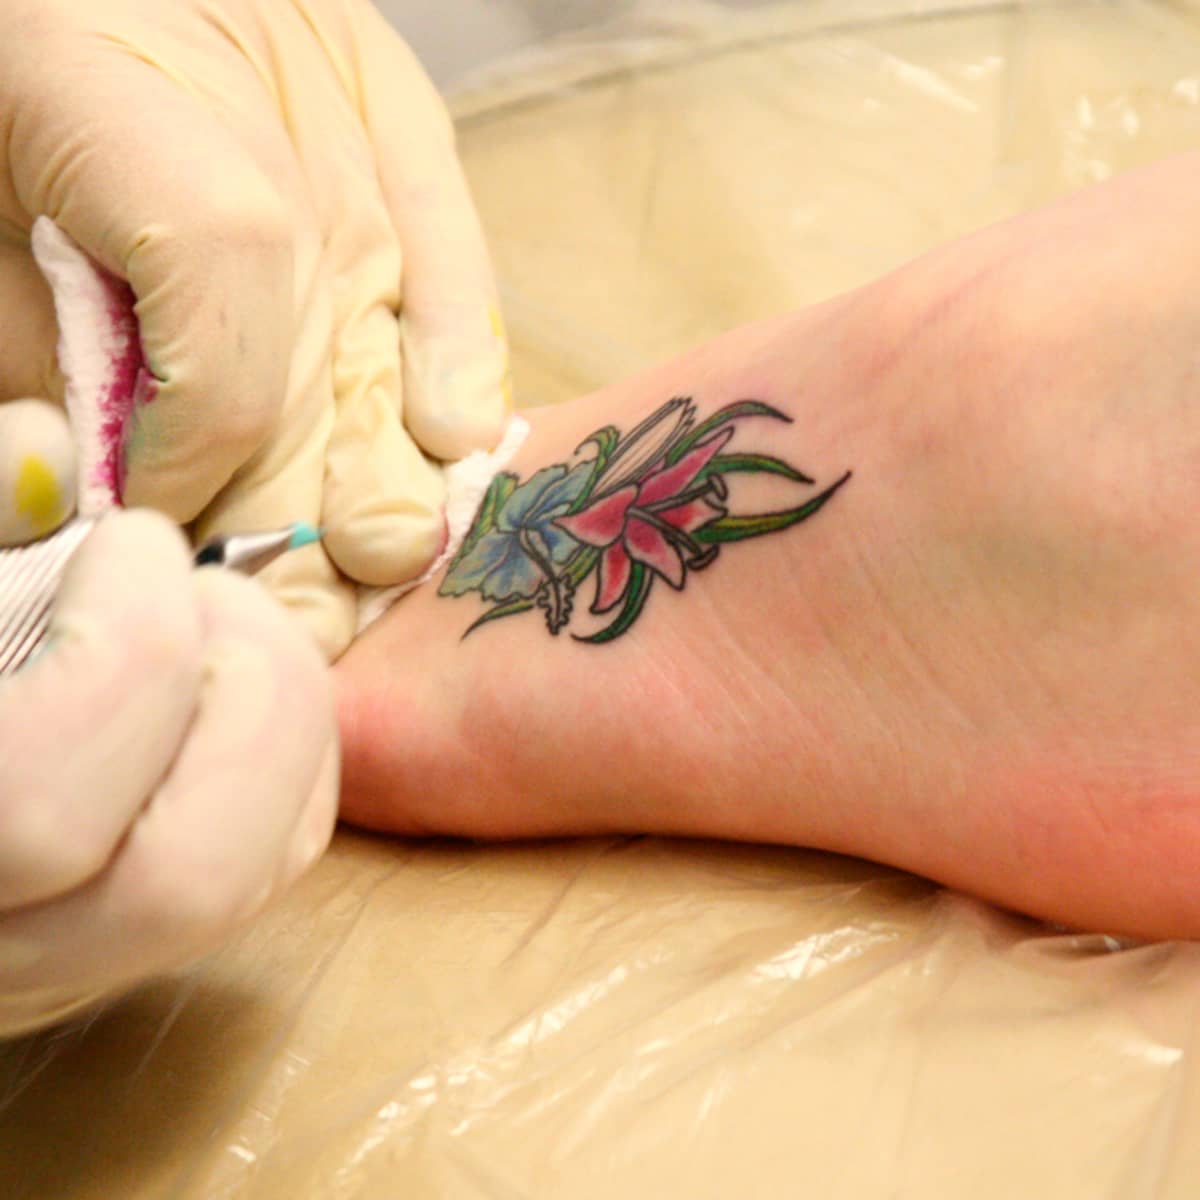 A Comprehensive Guide to Caring for Your New Tattoo - TatRing